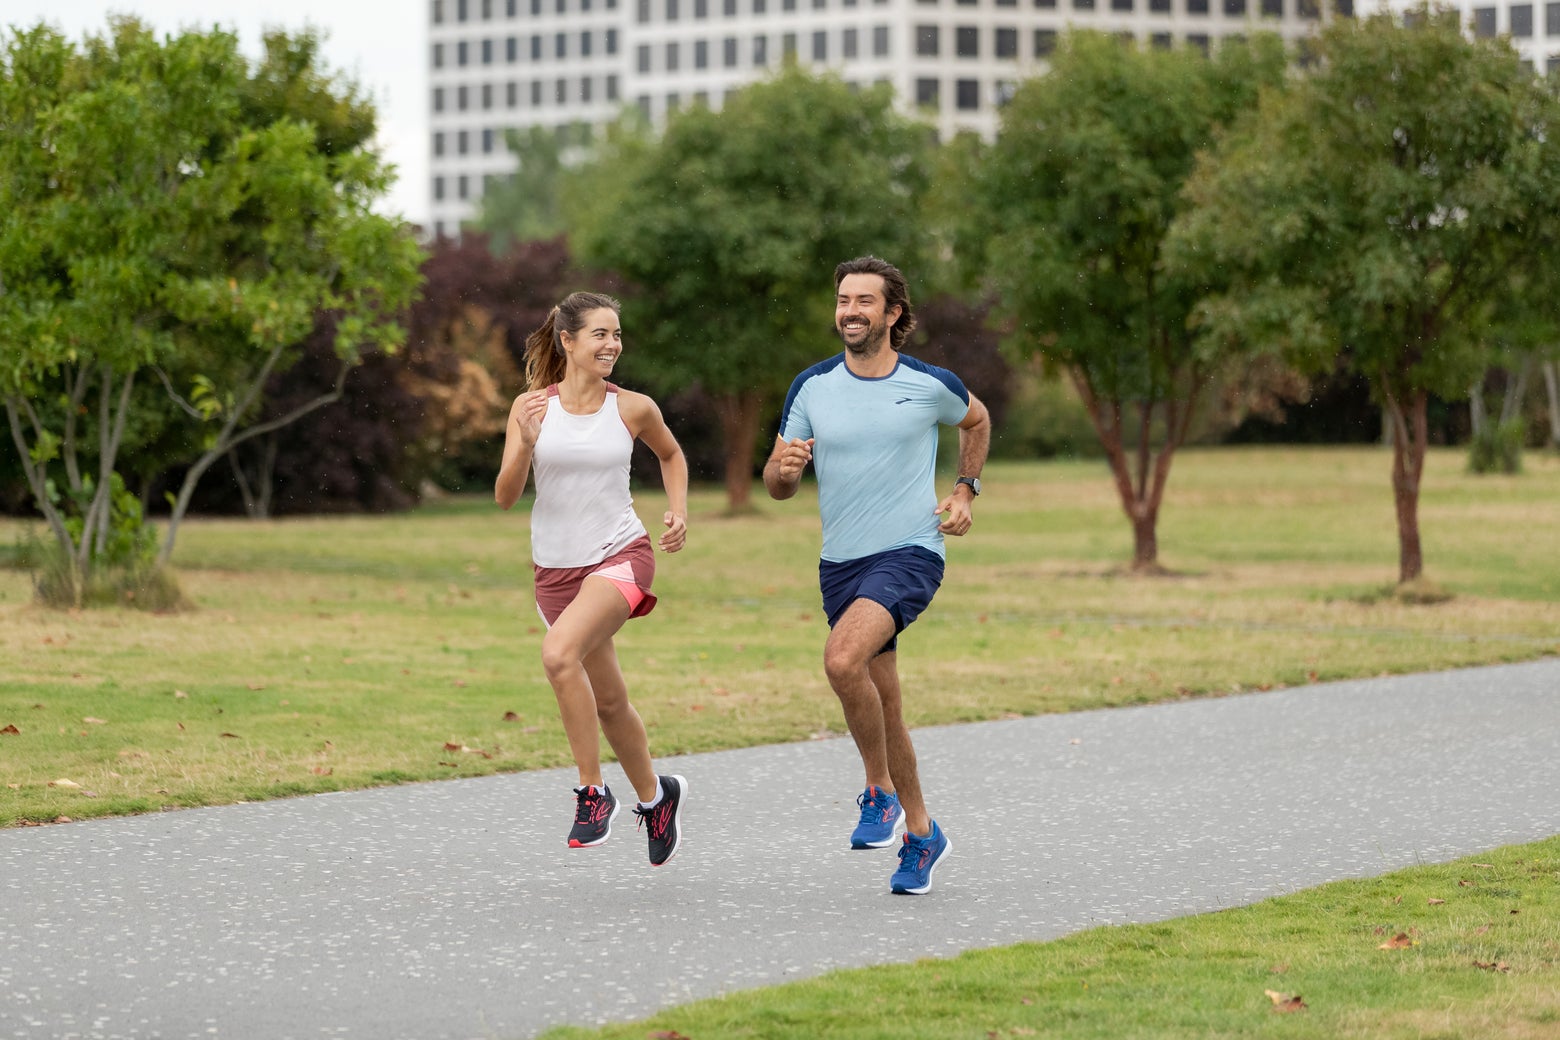 Man and woman running in an urban environment